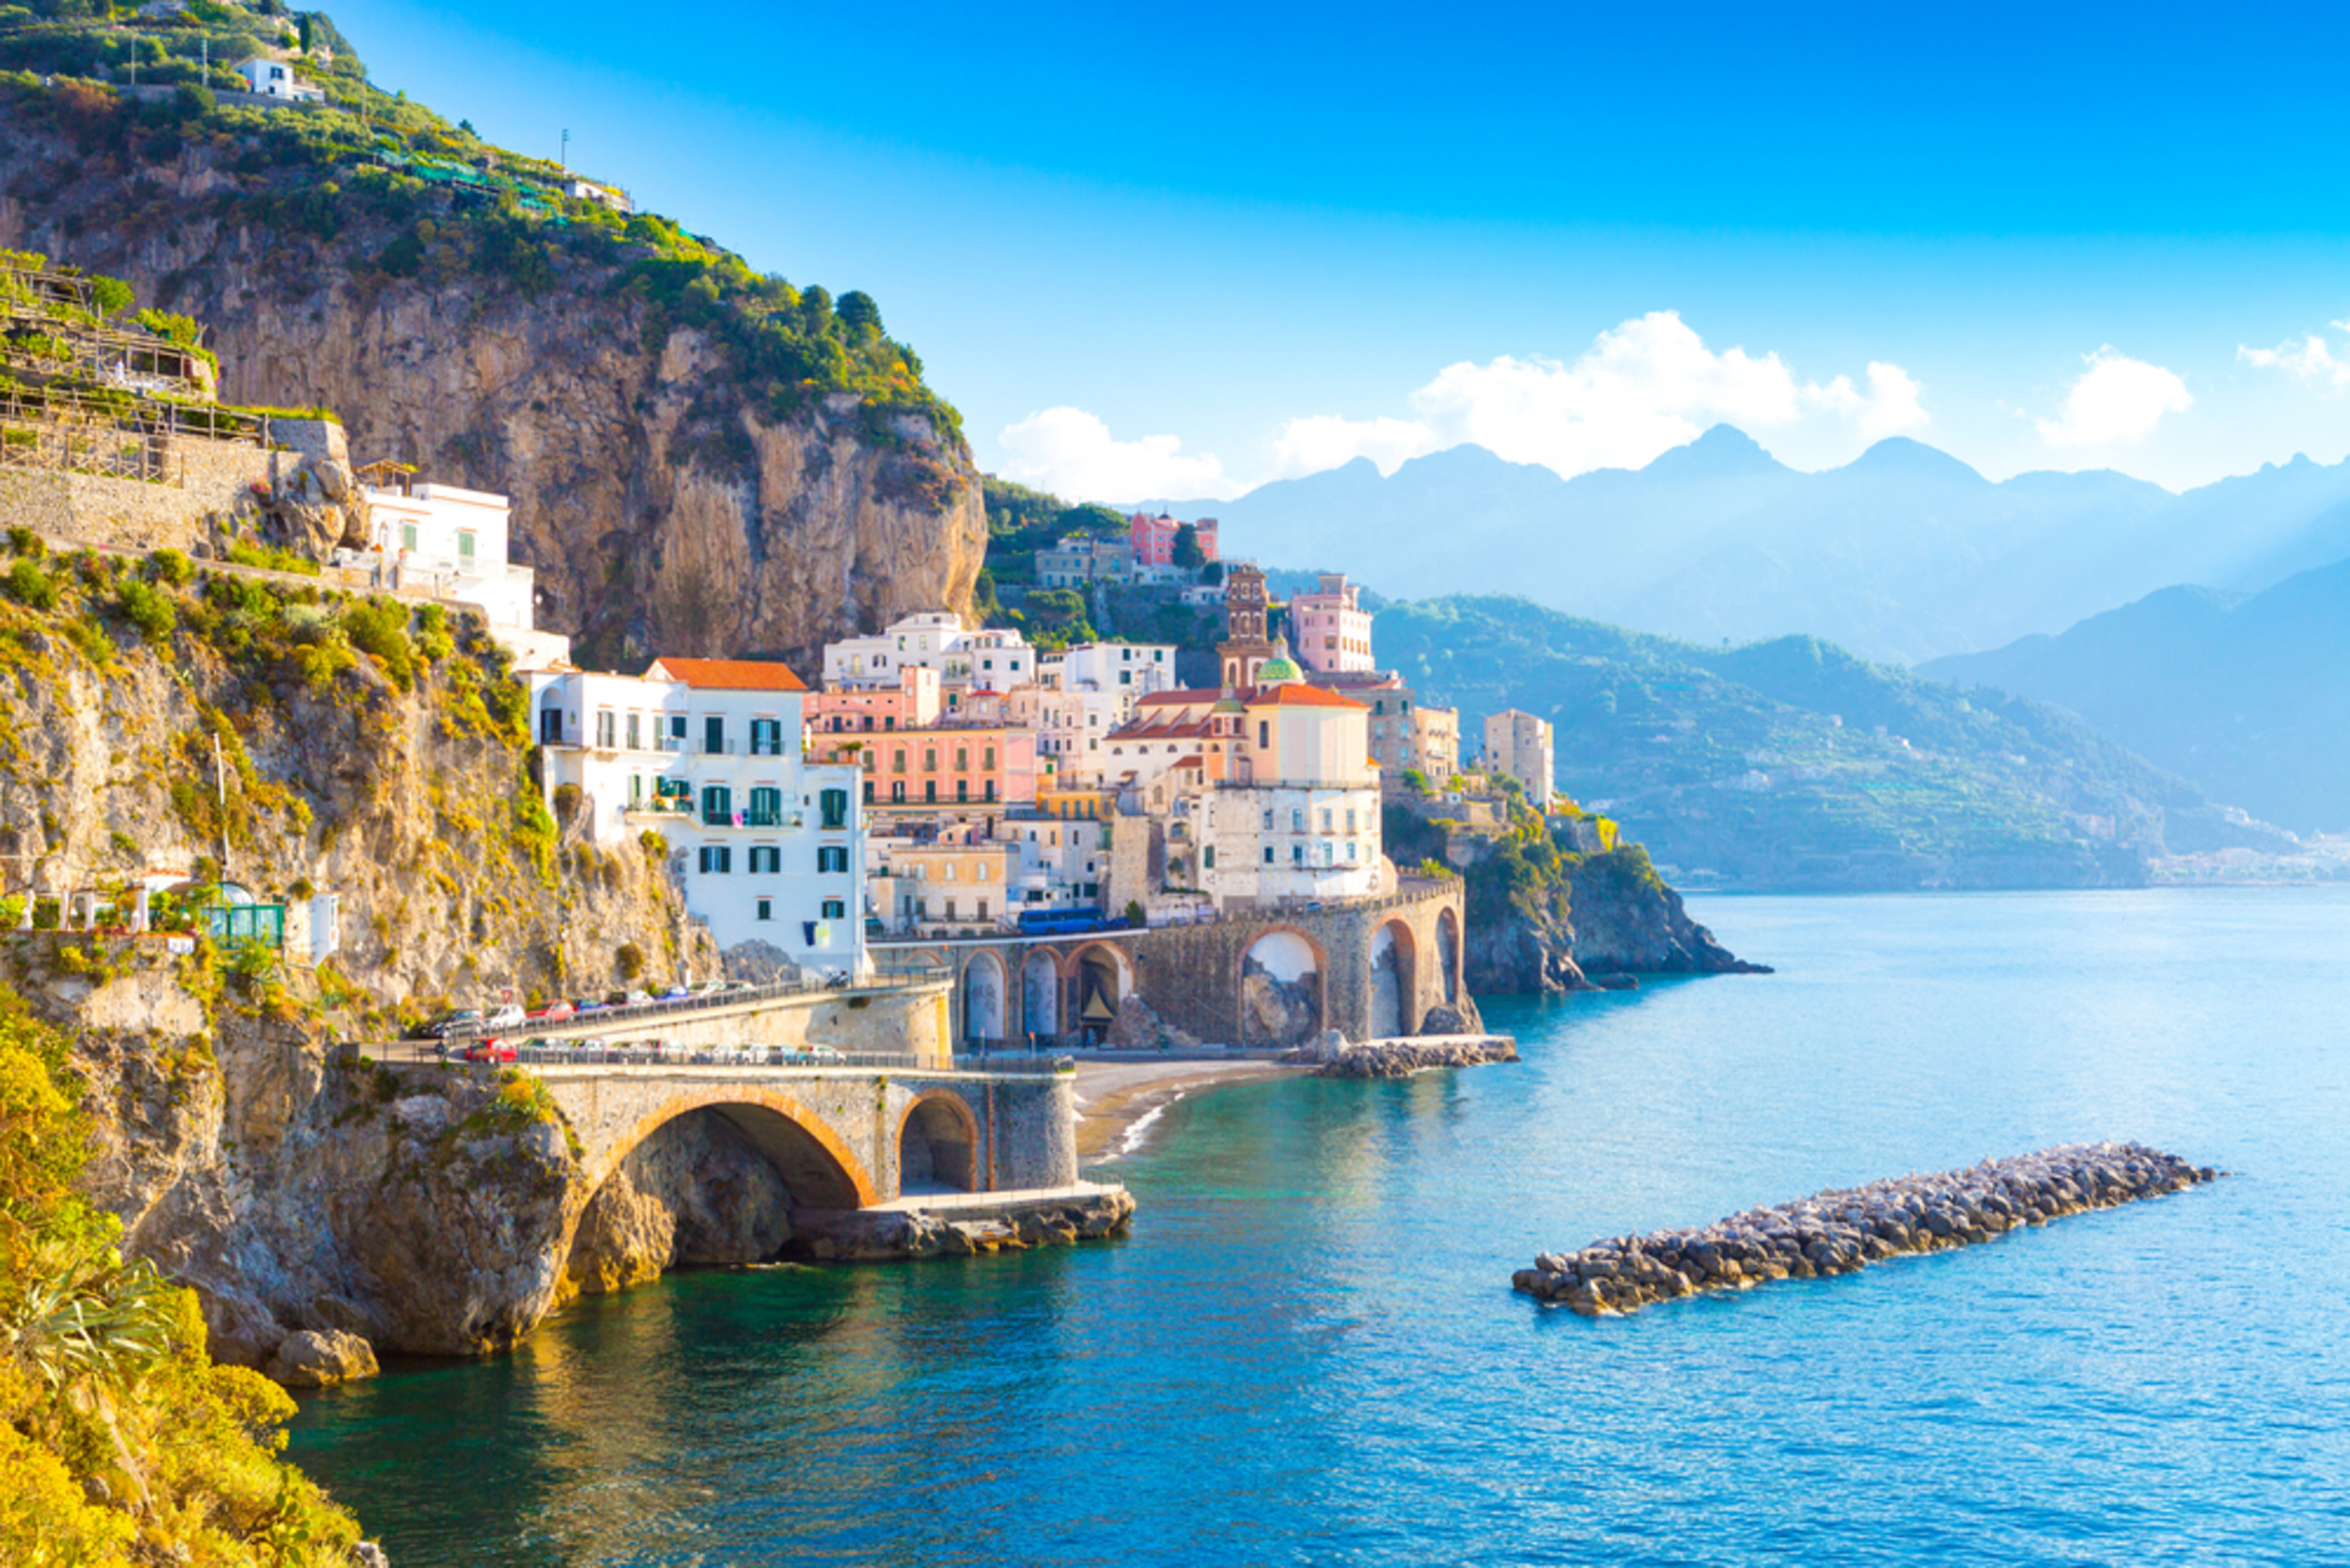 <p>Classified by UNESCO as a World Heritage Site, the breathtaking Amalfi Coast has become one of Europe's most popular tourist destinations in recent years, and for good reason. It's home to breathtaking views, incredible food, and sweeping cliffs that make the whole place look like a painting. </p><p><a href='https://www.msn.com/en-us/community/channel/vid-cj9pqbr0vn9in2b6ddcd8sfgpfq6x6utp44fssrv6mc2gtybw0us'>Follow us on MSN to see more of our exclusive lifestyle content.</a></p>